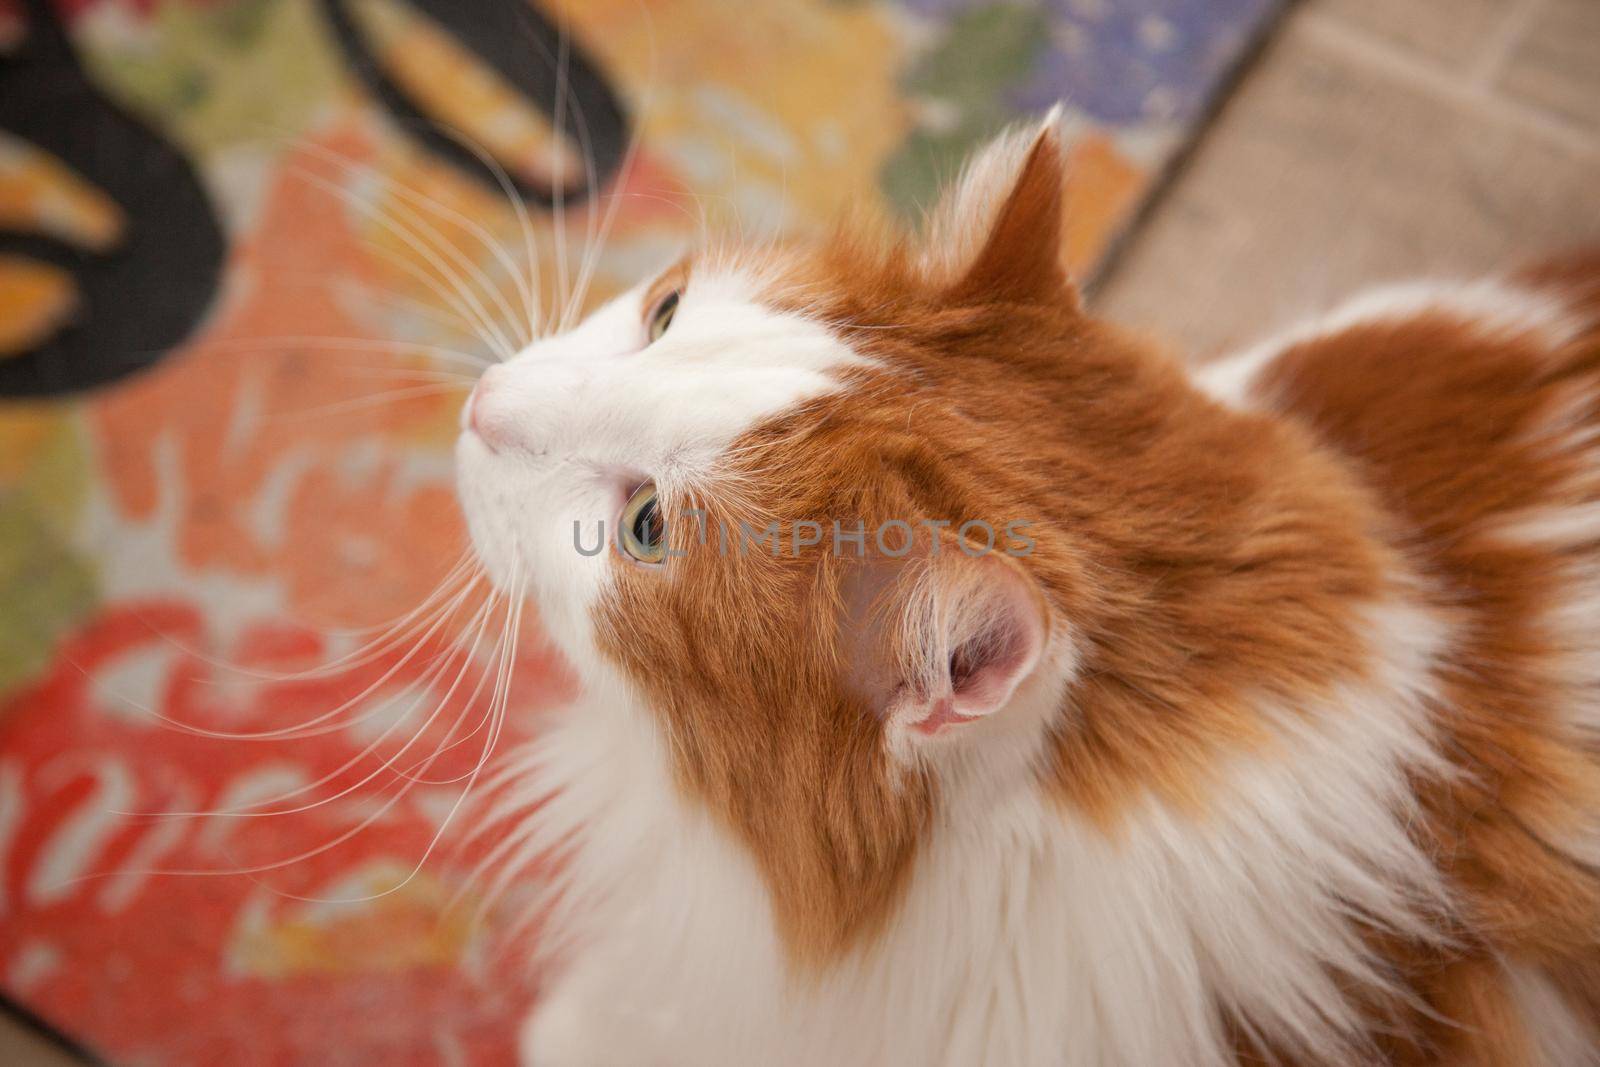 A fluffy cat portrait with colorful rug in background